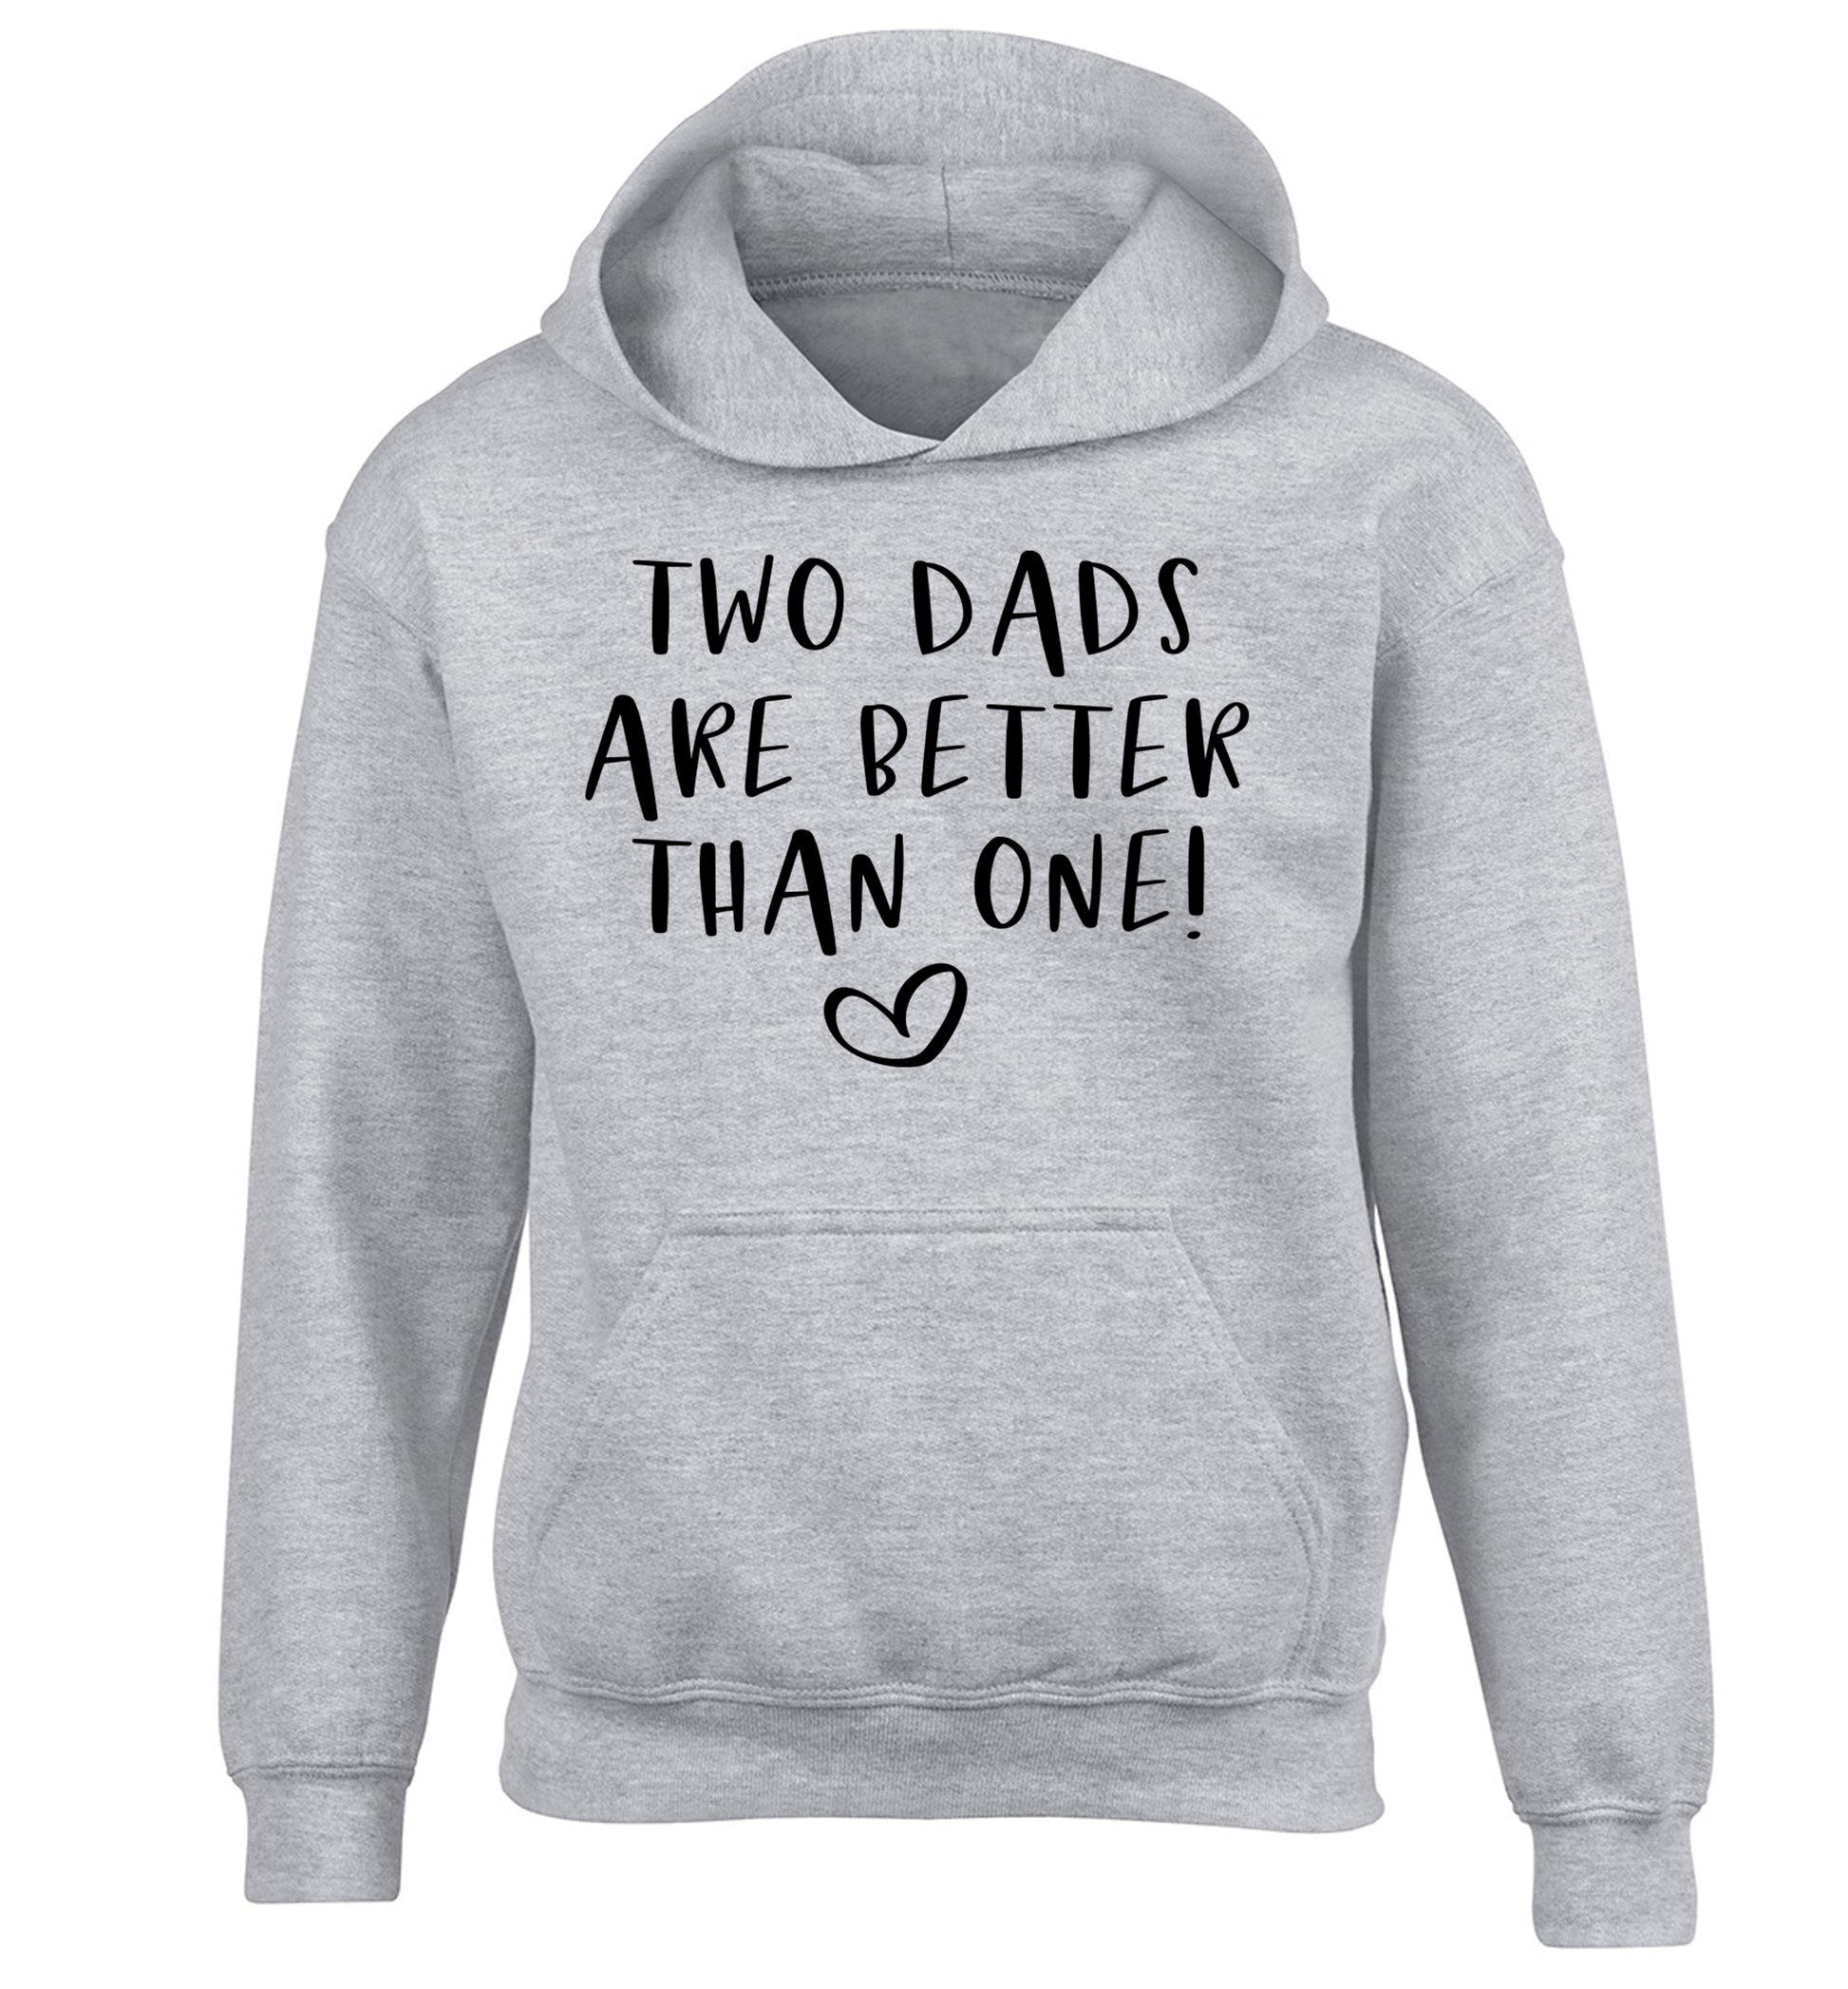 Two dads are better than one children's grey hoodie 12-13 Years